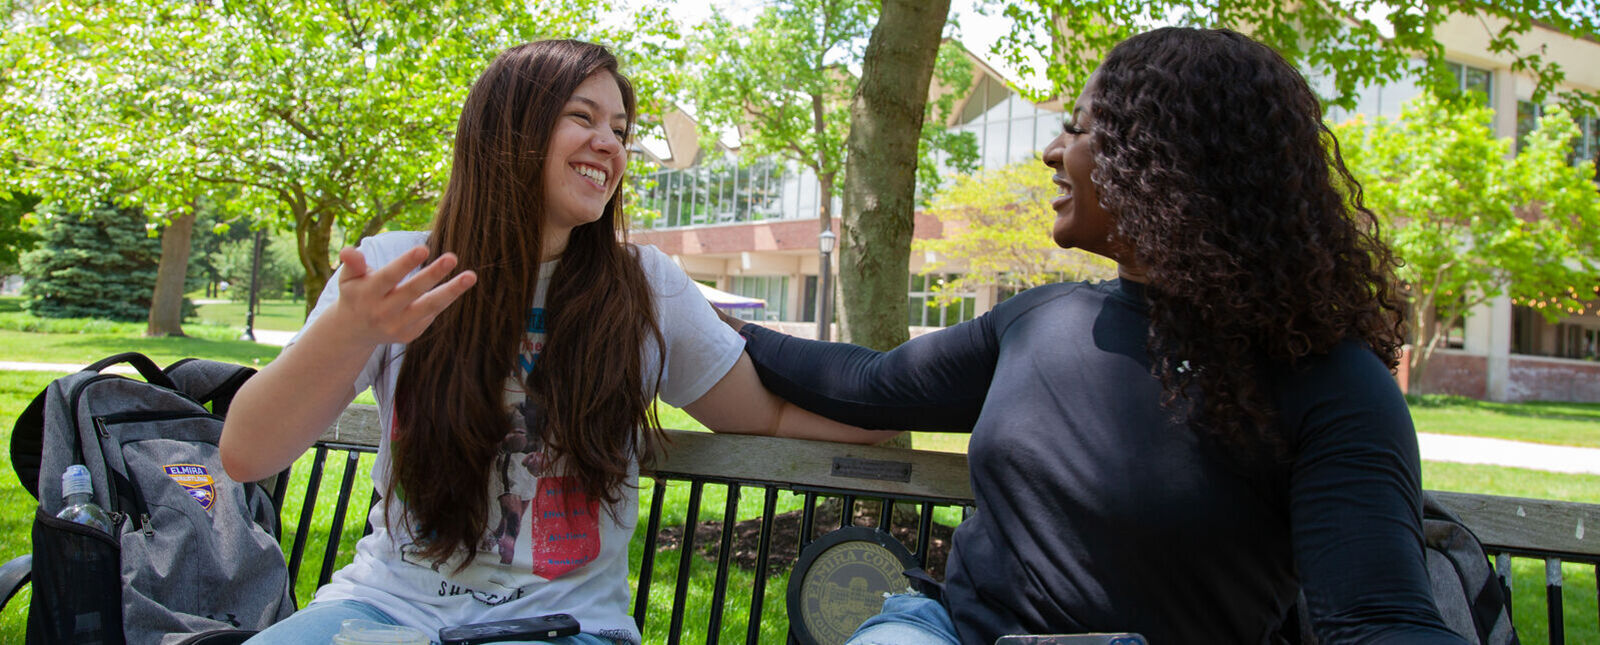 Two female students laugh while talking on a bench